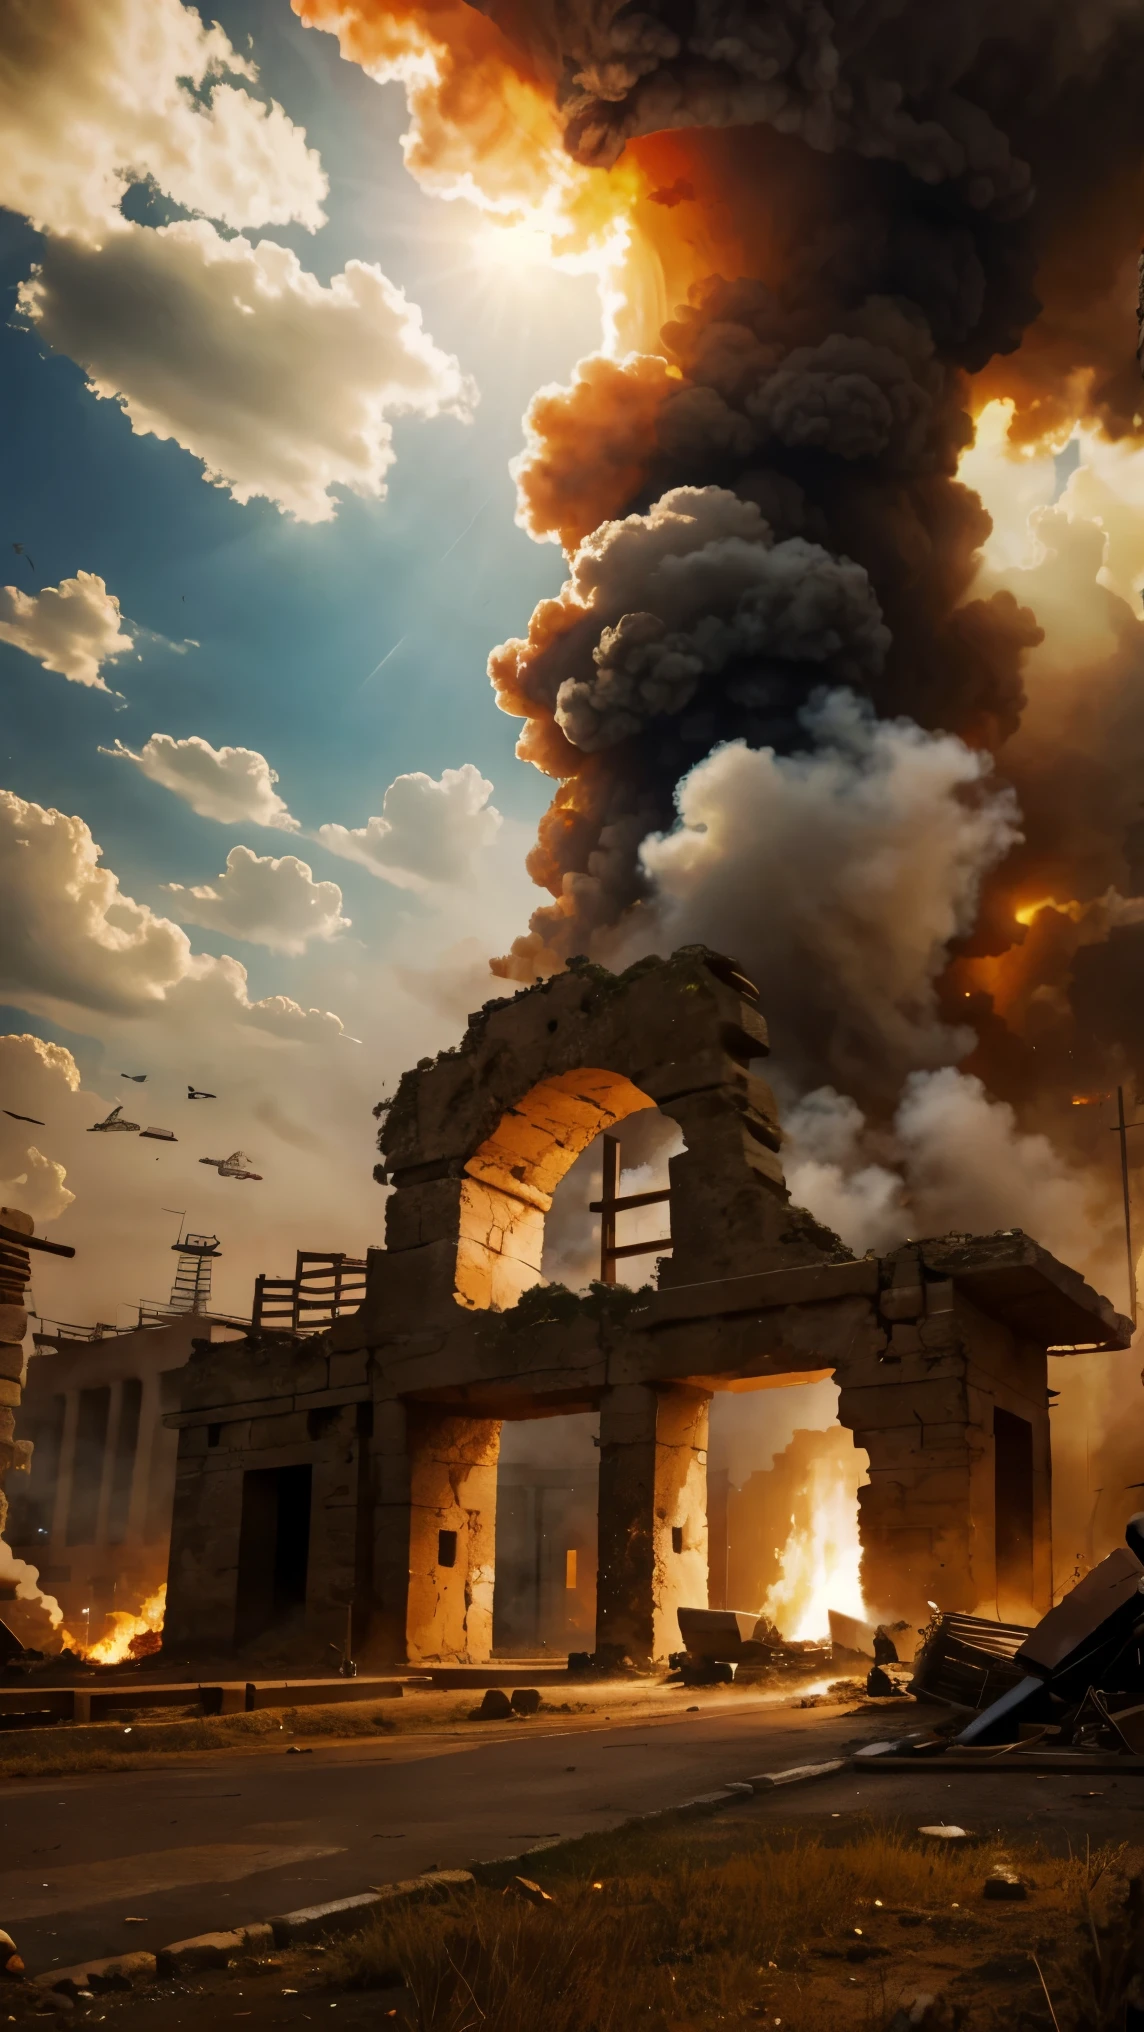 surreal image of the fiery hole in the sky consuming everything evokes a haunting mood of helplessness and impending doom. Ancient city is burning. people running scared